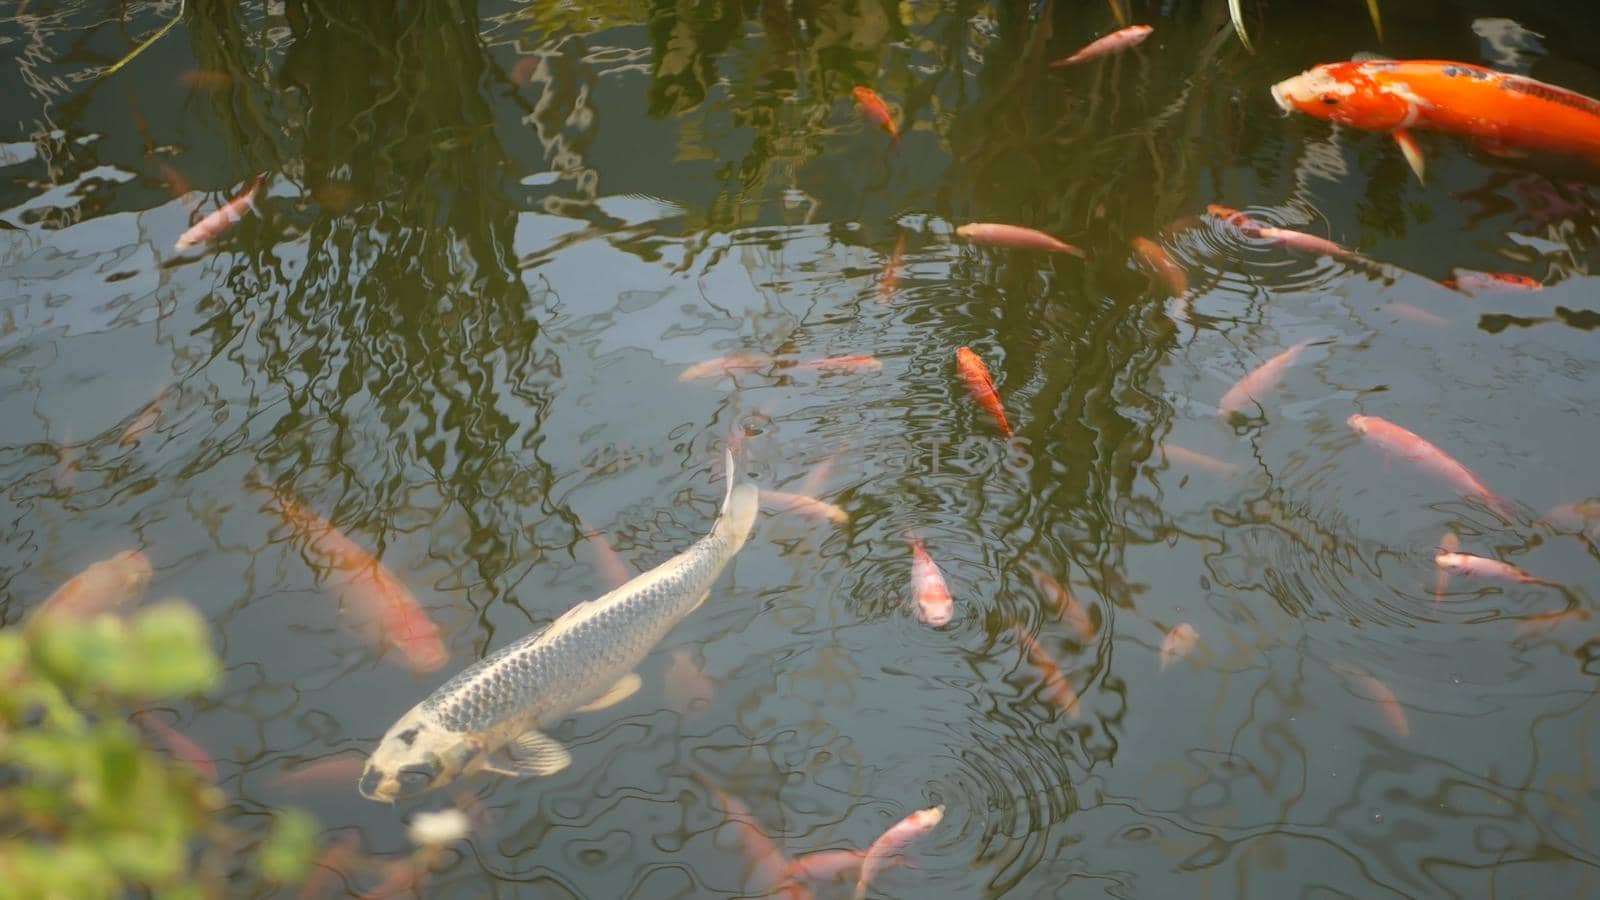 Natural greenery background. Vibrant Colorful Japanese Koi Carp fish swimming in traditional garden lake or pond. Chinese Fancy Carps under water surface. Oriental symbols of fortune and good luck. by DogoraSun